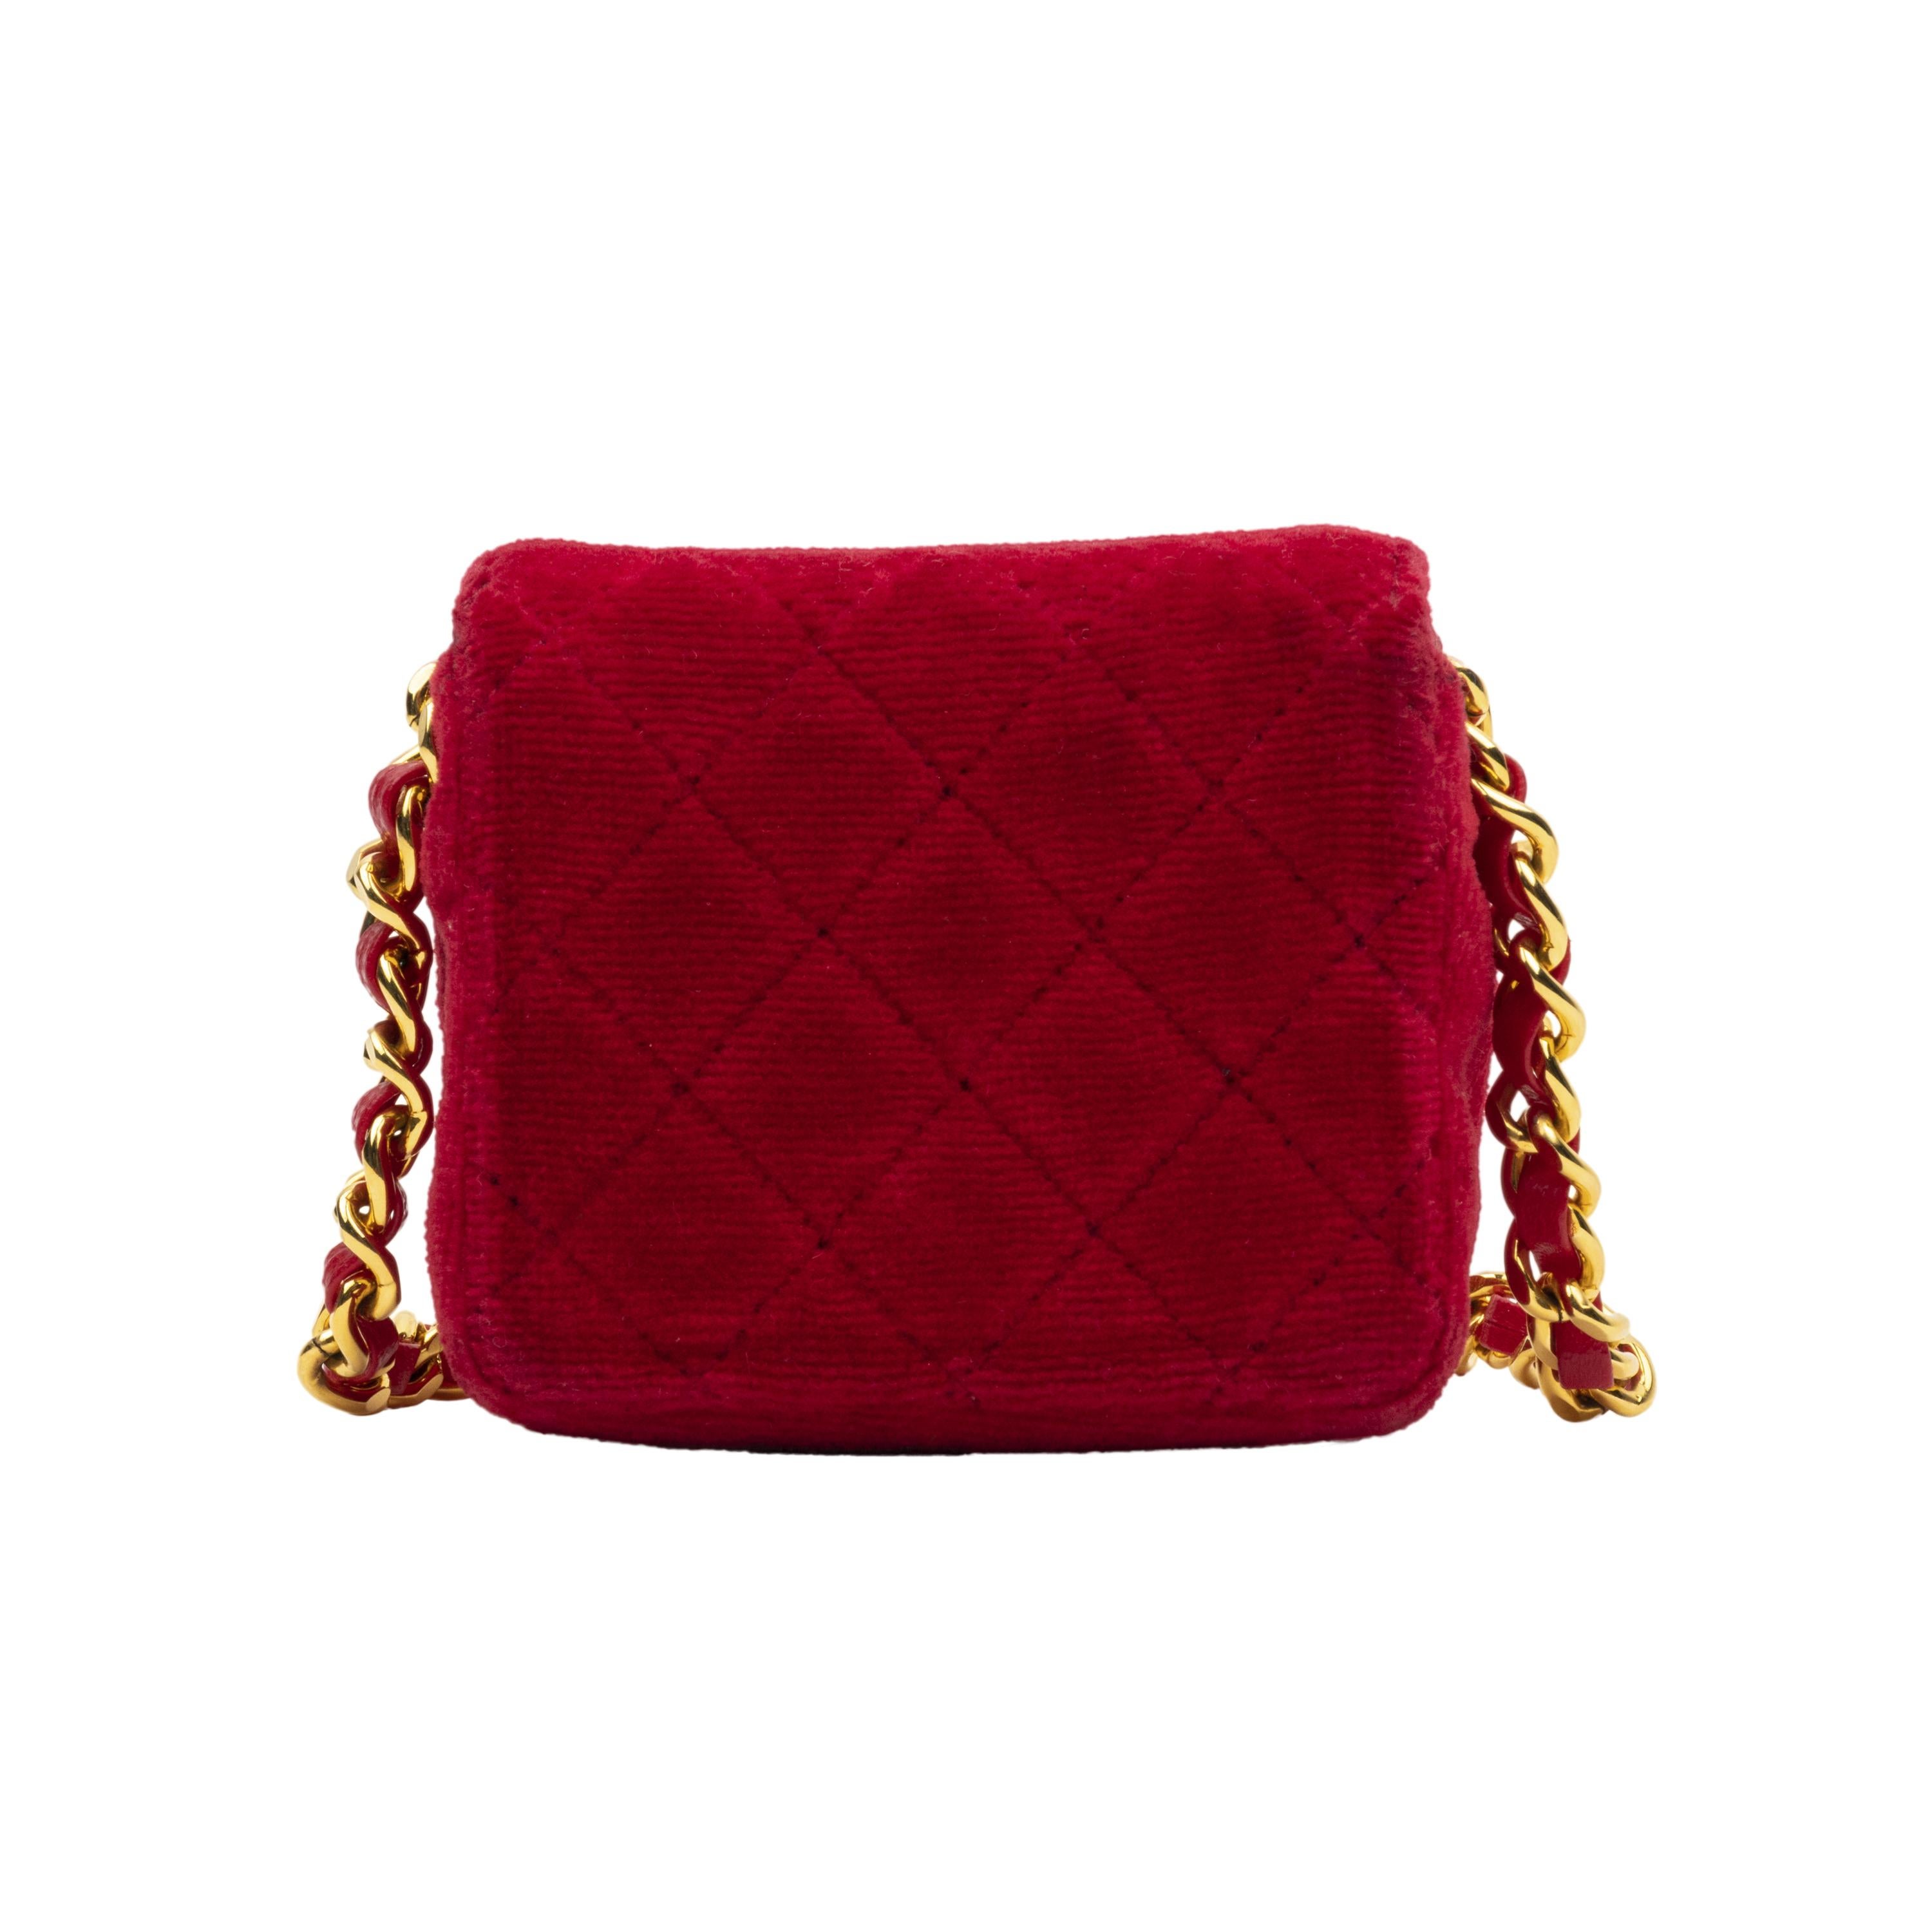 Chanel red velvet micro bag. This style is enhanced with diamond matelassé, golden details, pressure flap closure decorated with the crossed CC logo, and chain shoulder strap with intertwined with leather. The interior is black with the golden logo.